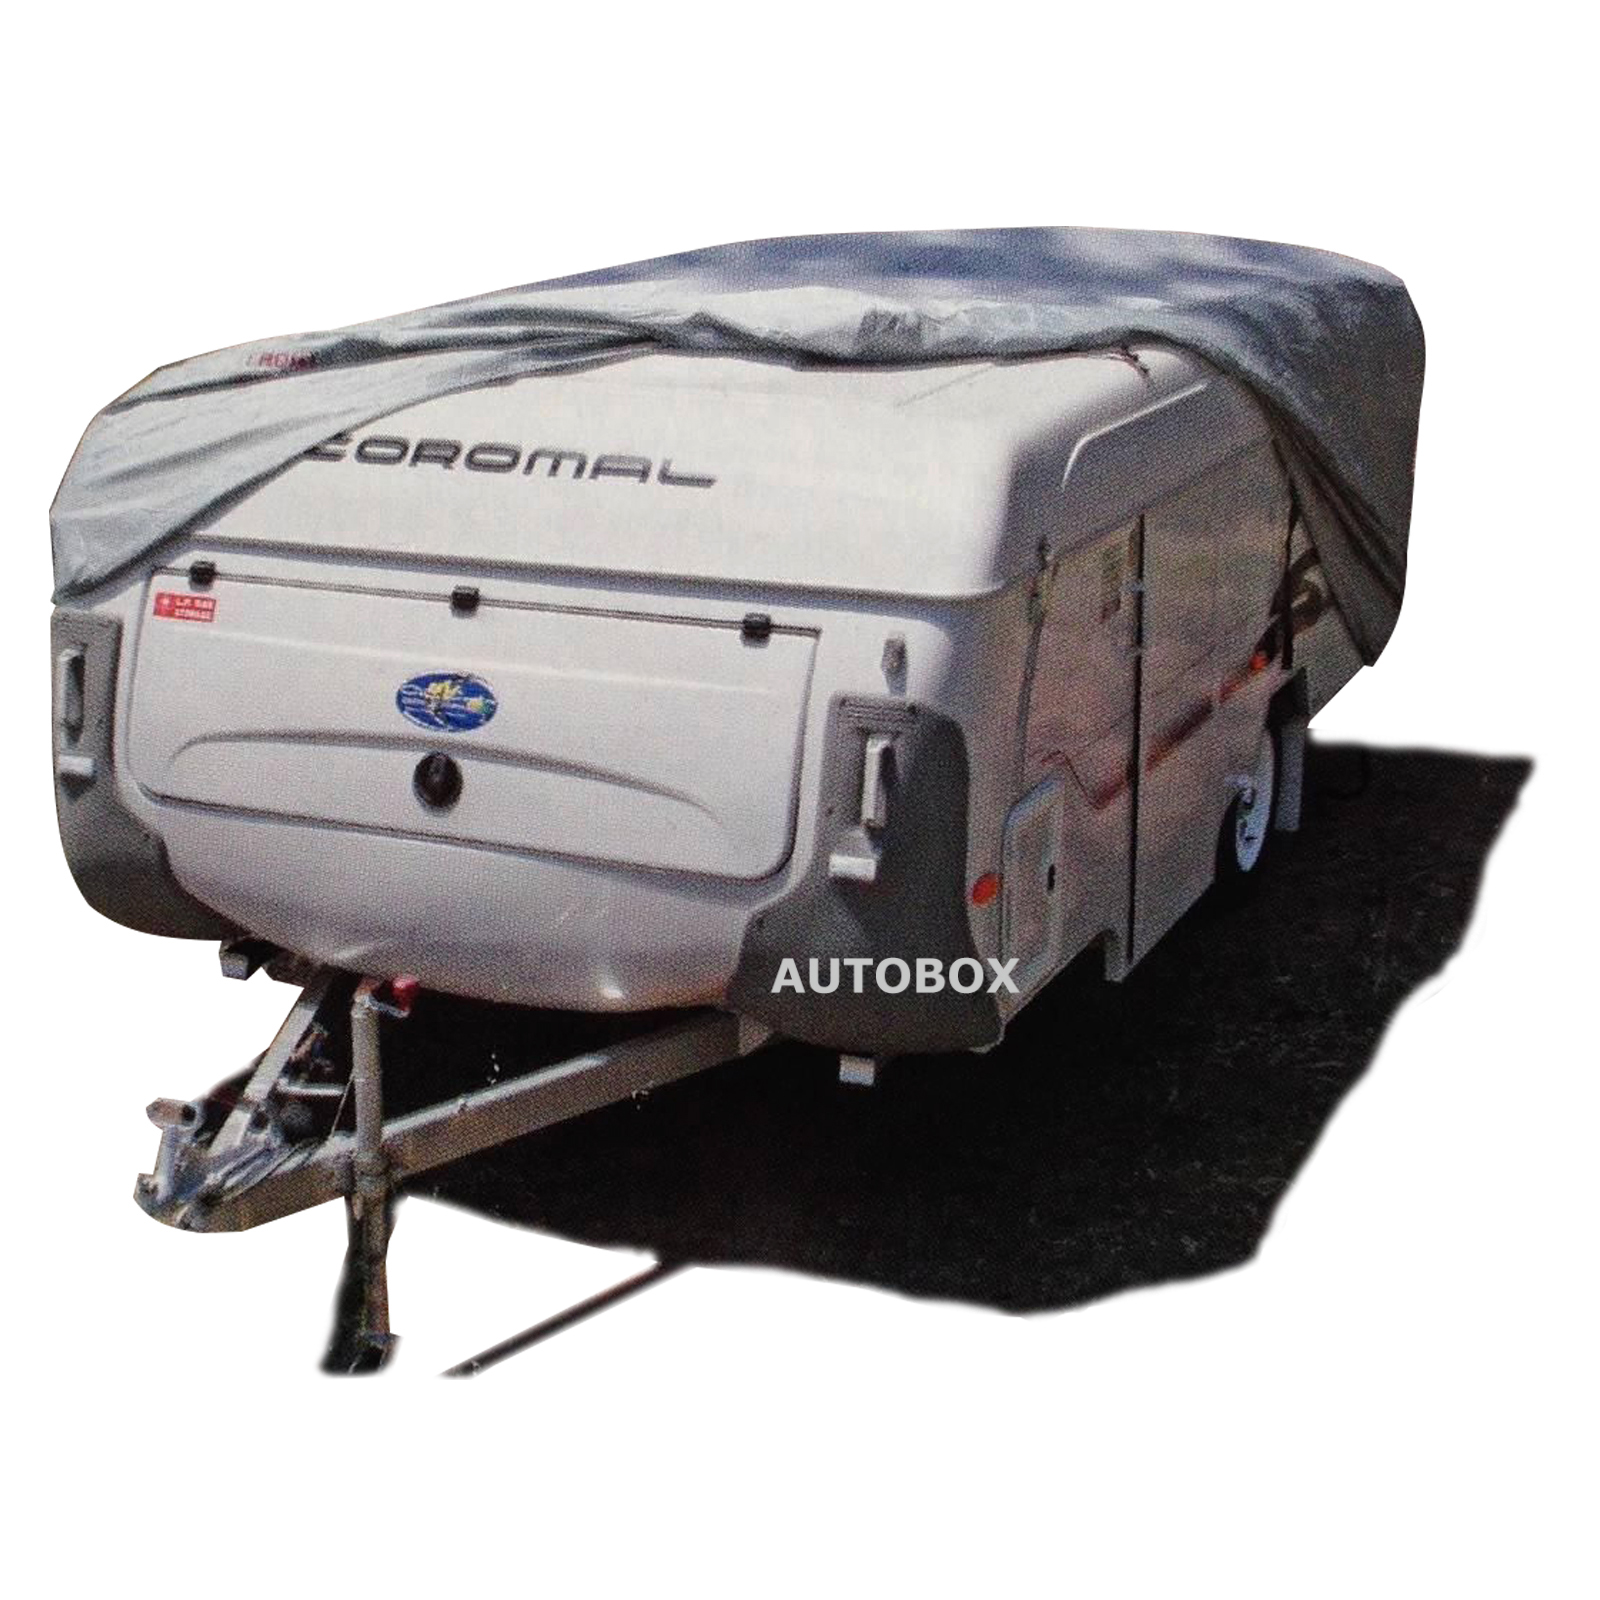 jayco travel trailer covers